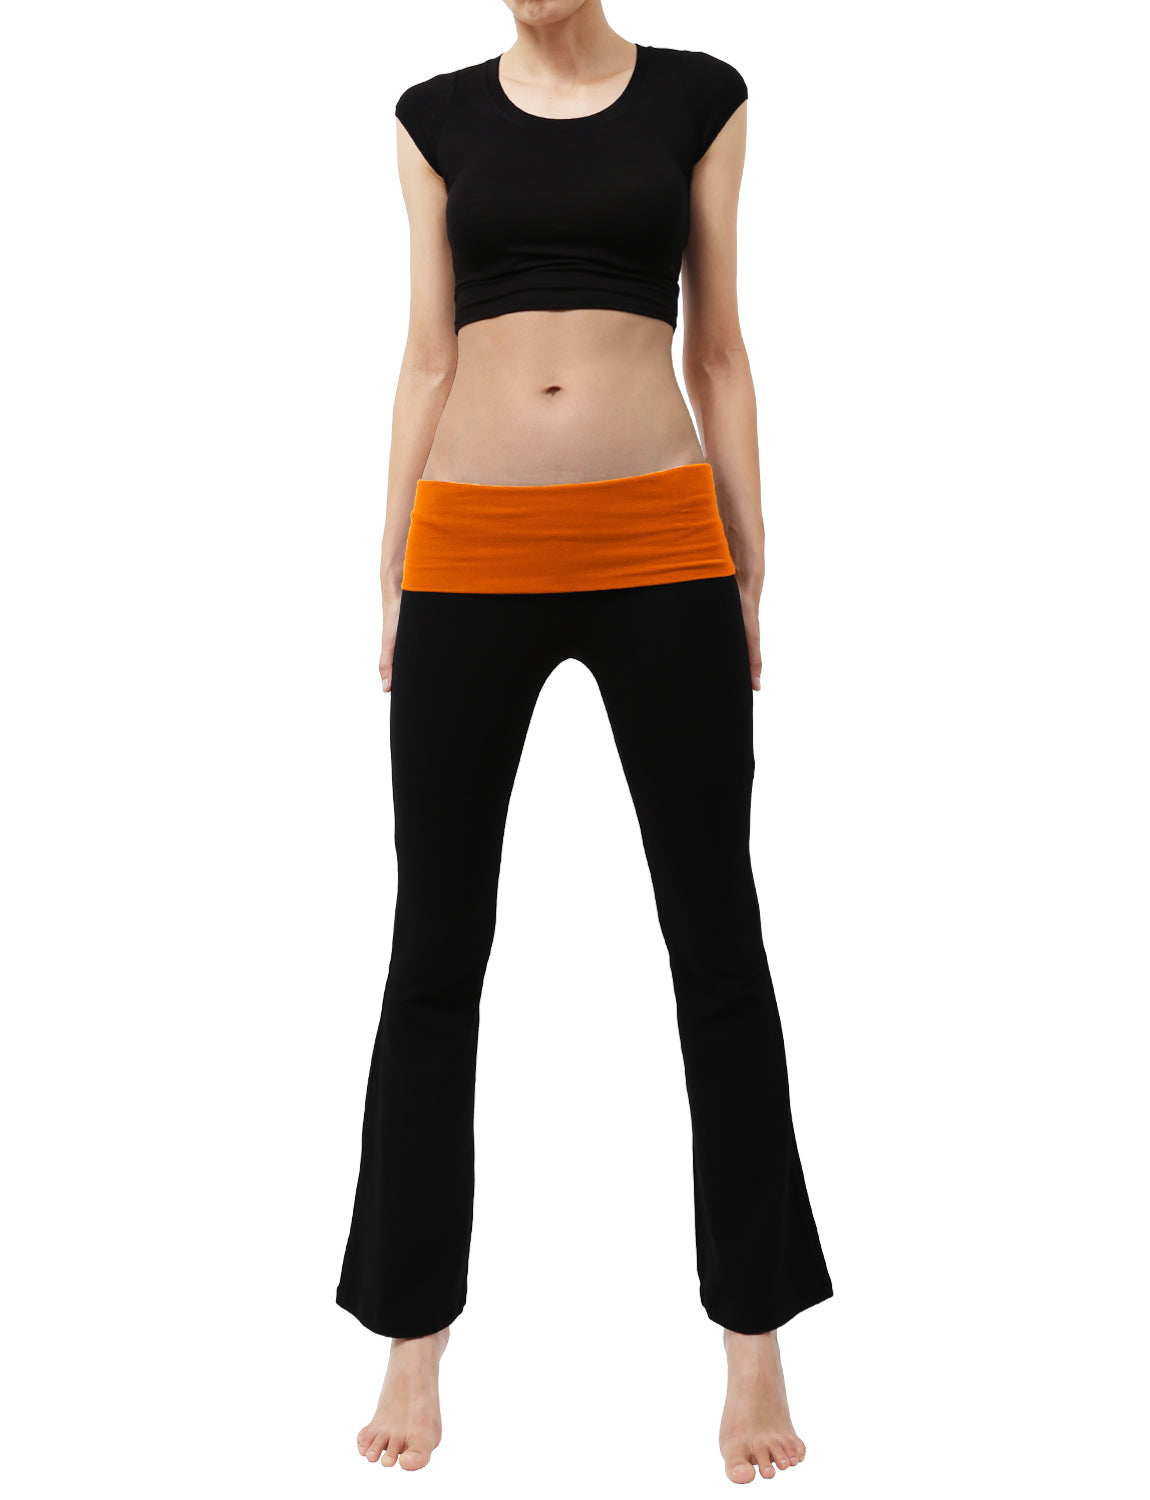 LIGHT WEIGHT SOLID STRETCH FOLD OVER FLARE YOGA PANTS - NE PEOPLE